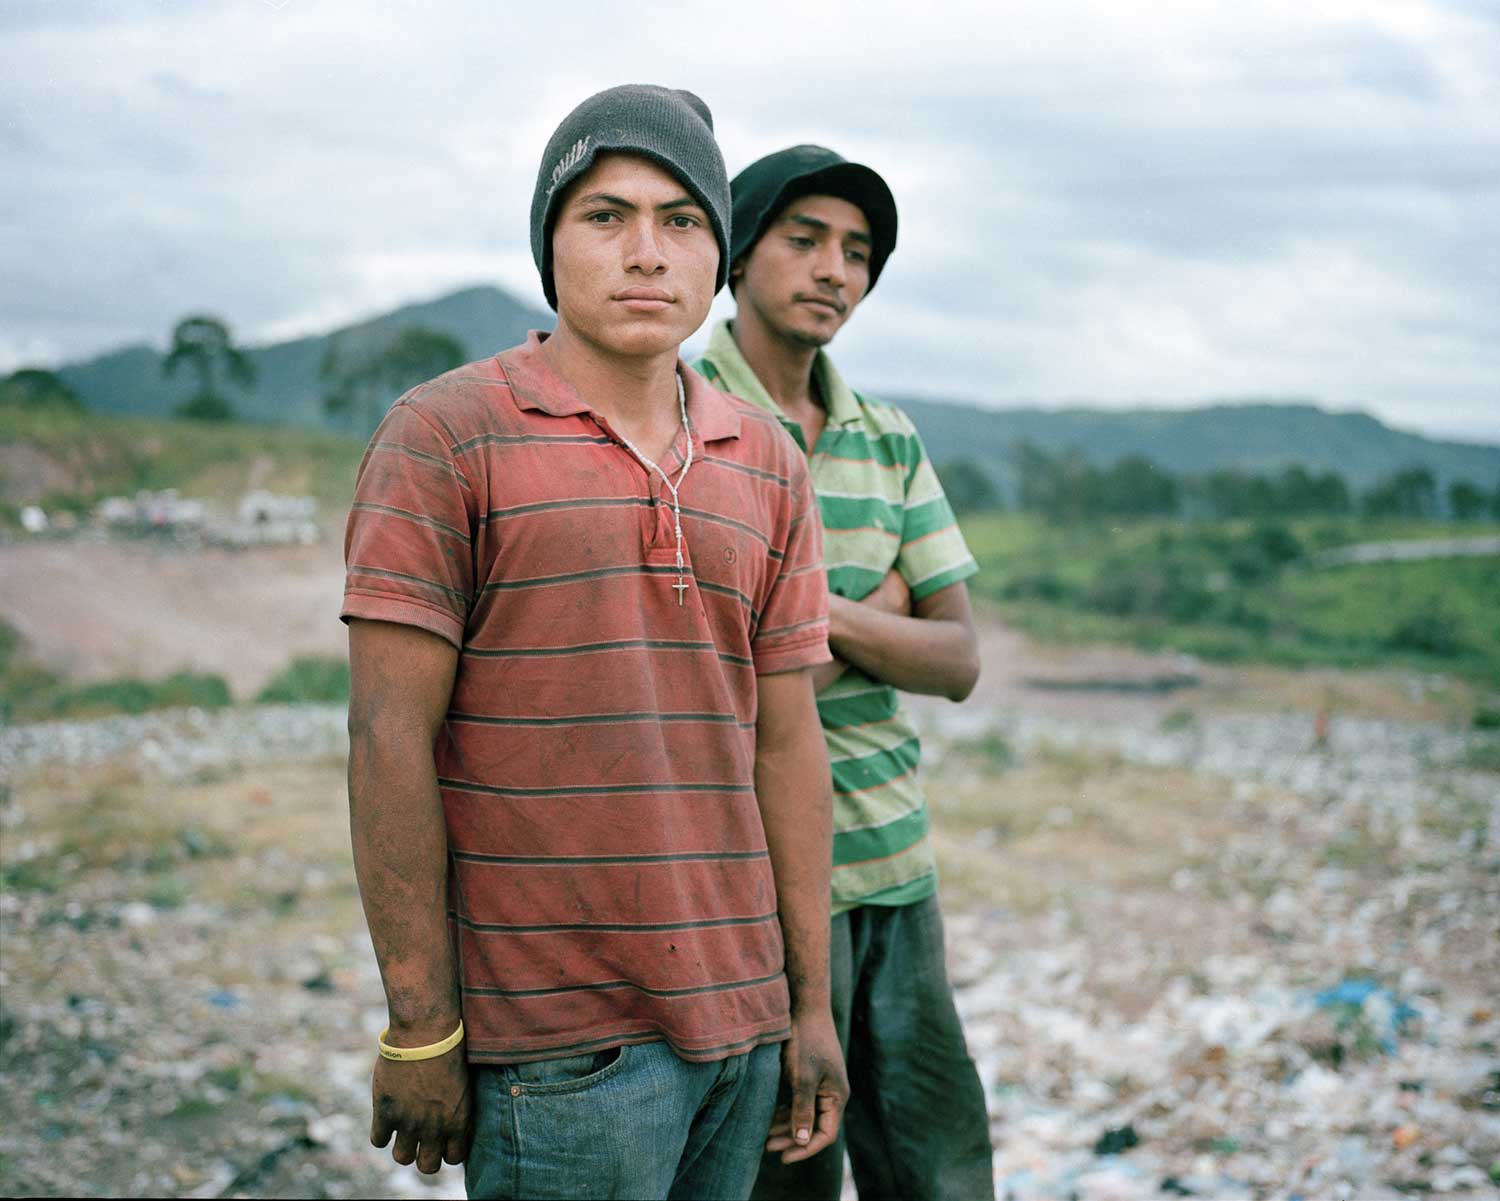 Angel and Gerson pose for a portrait in the municipal dump where they work in Tegucigalpa. This image forms part of Dominic Bracco II's Visionary Award project. (Dominic Bracco II)